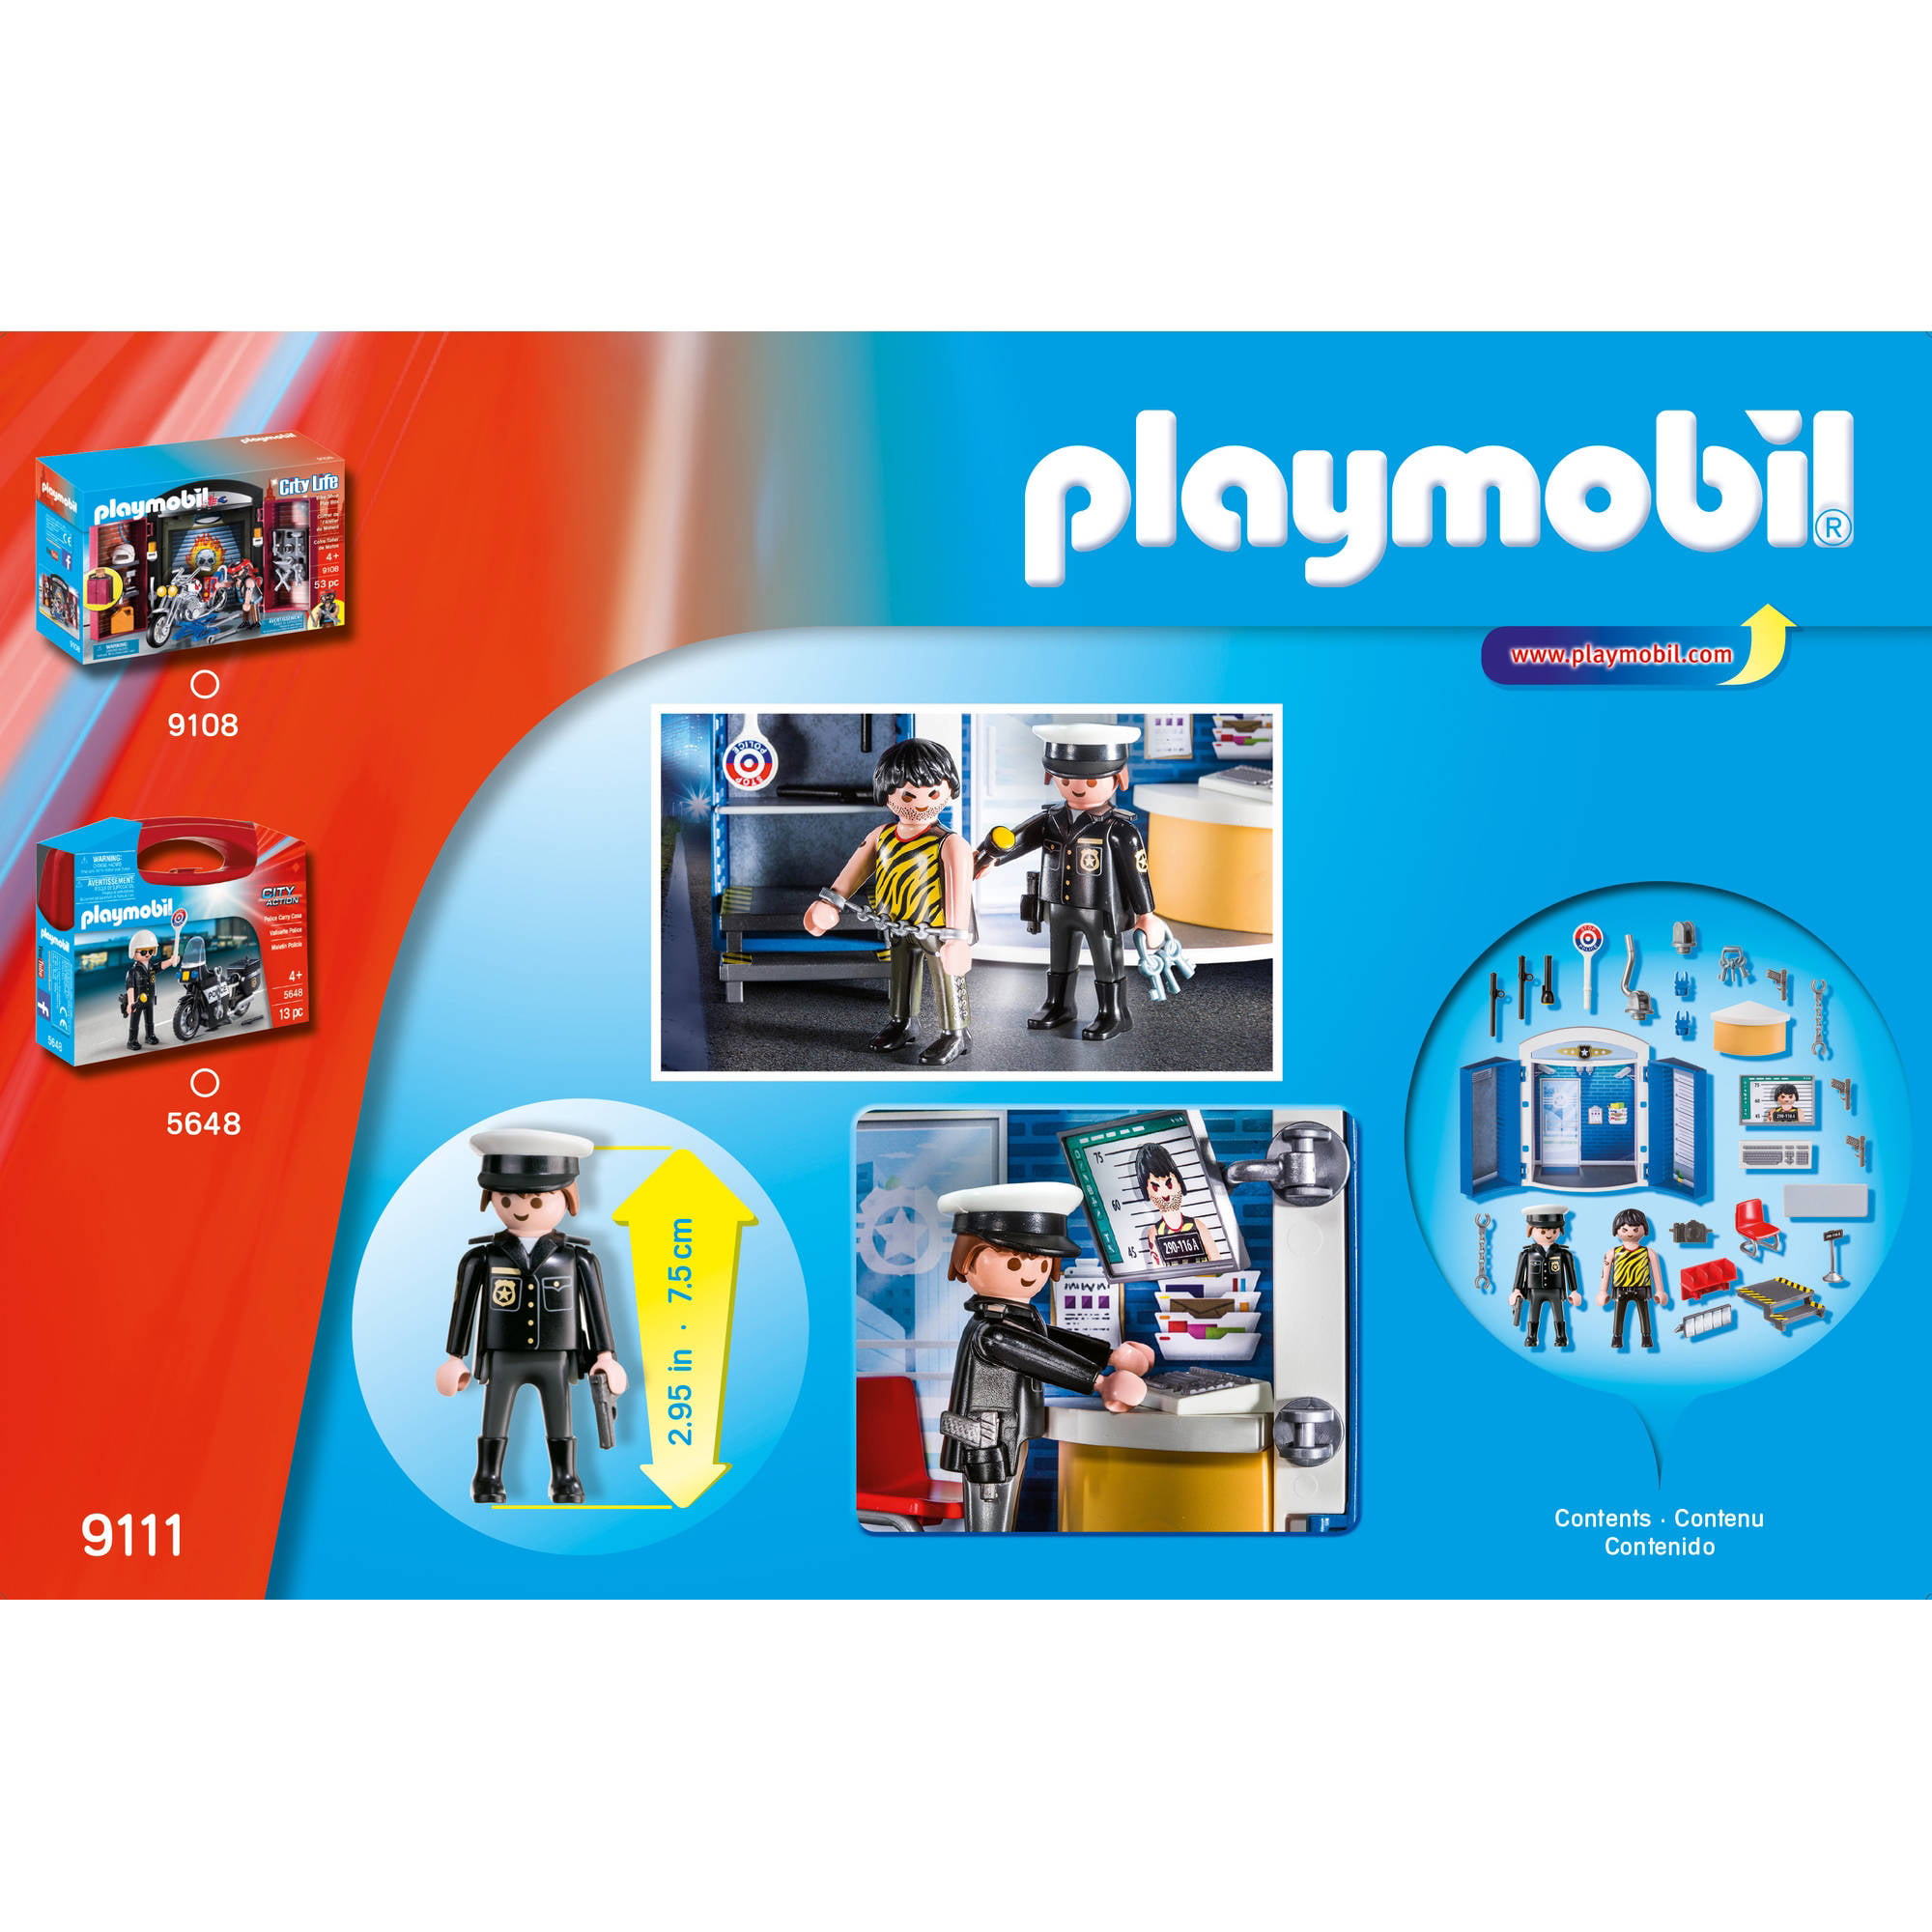 NIB Playmobil 9111 City Action Police Station Play Box 50pc Set Ages 4+ 